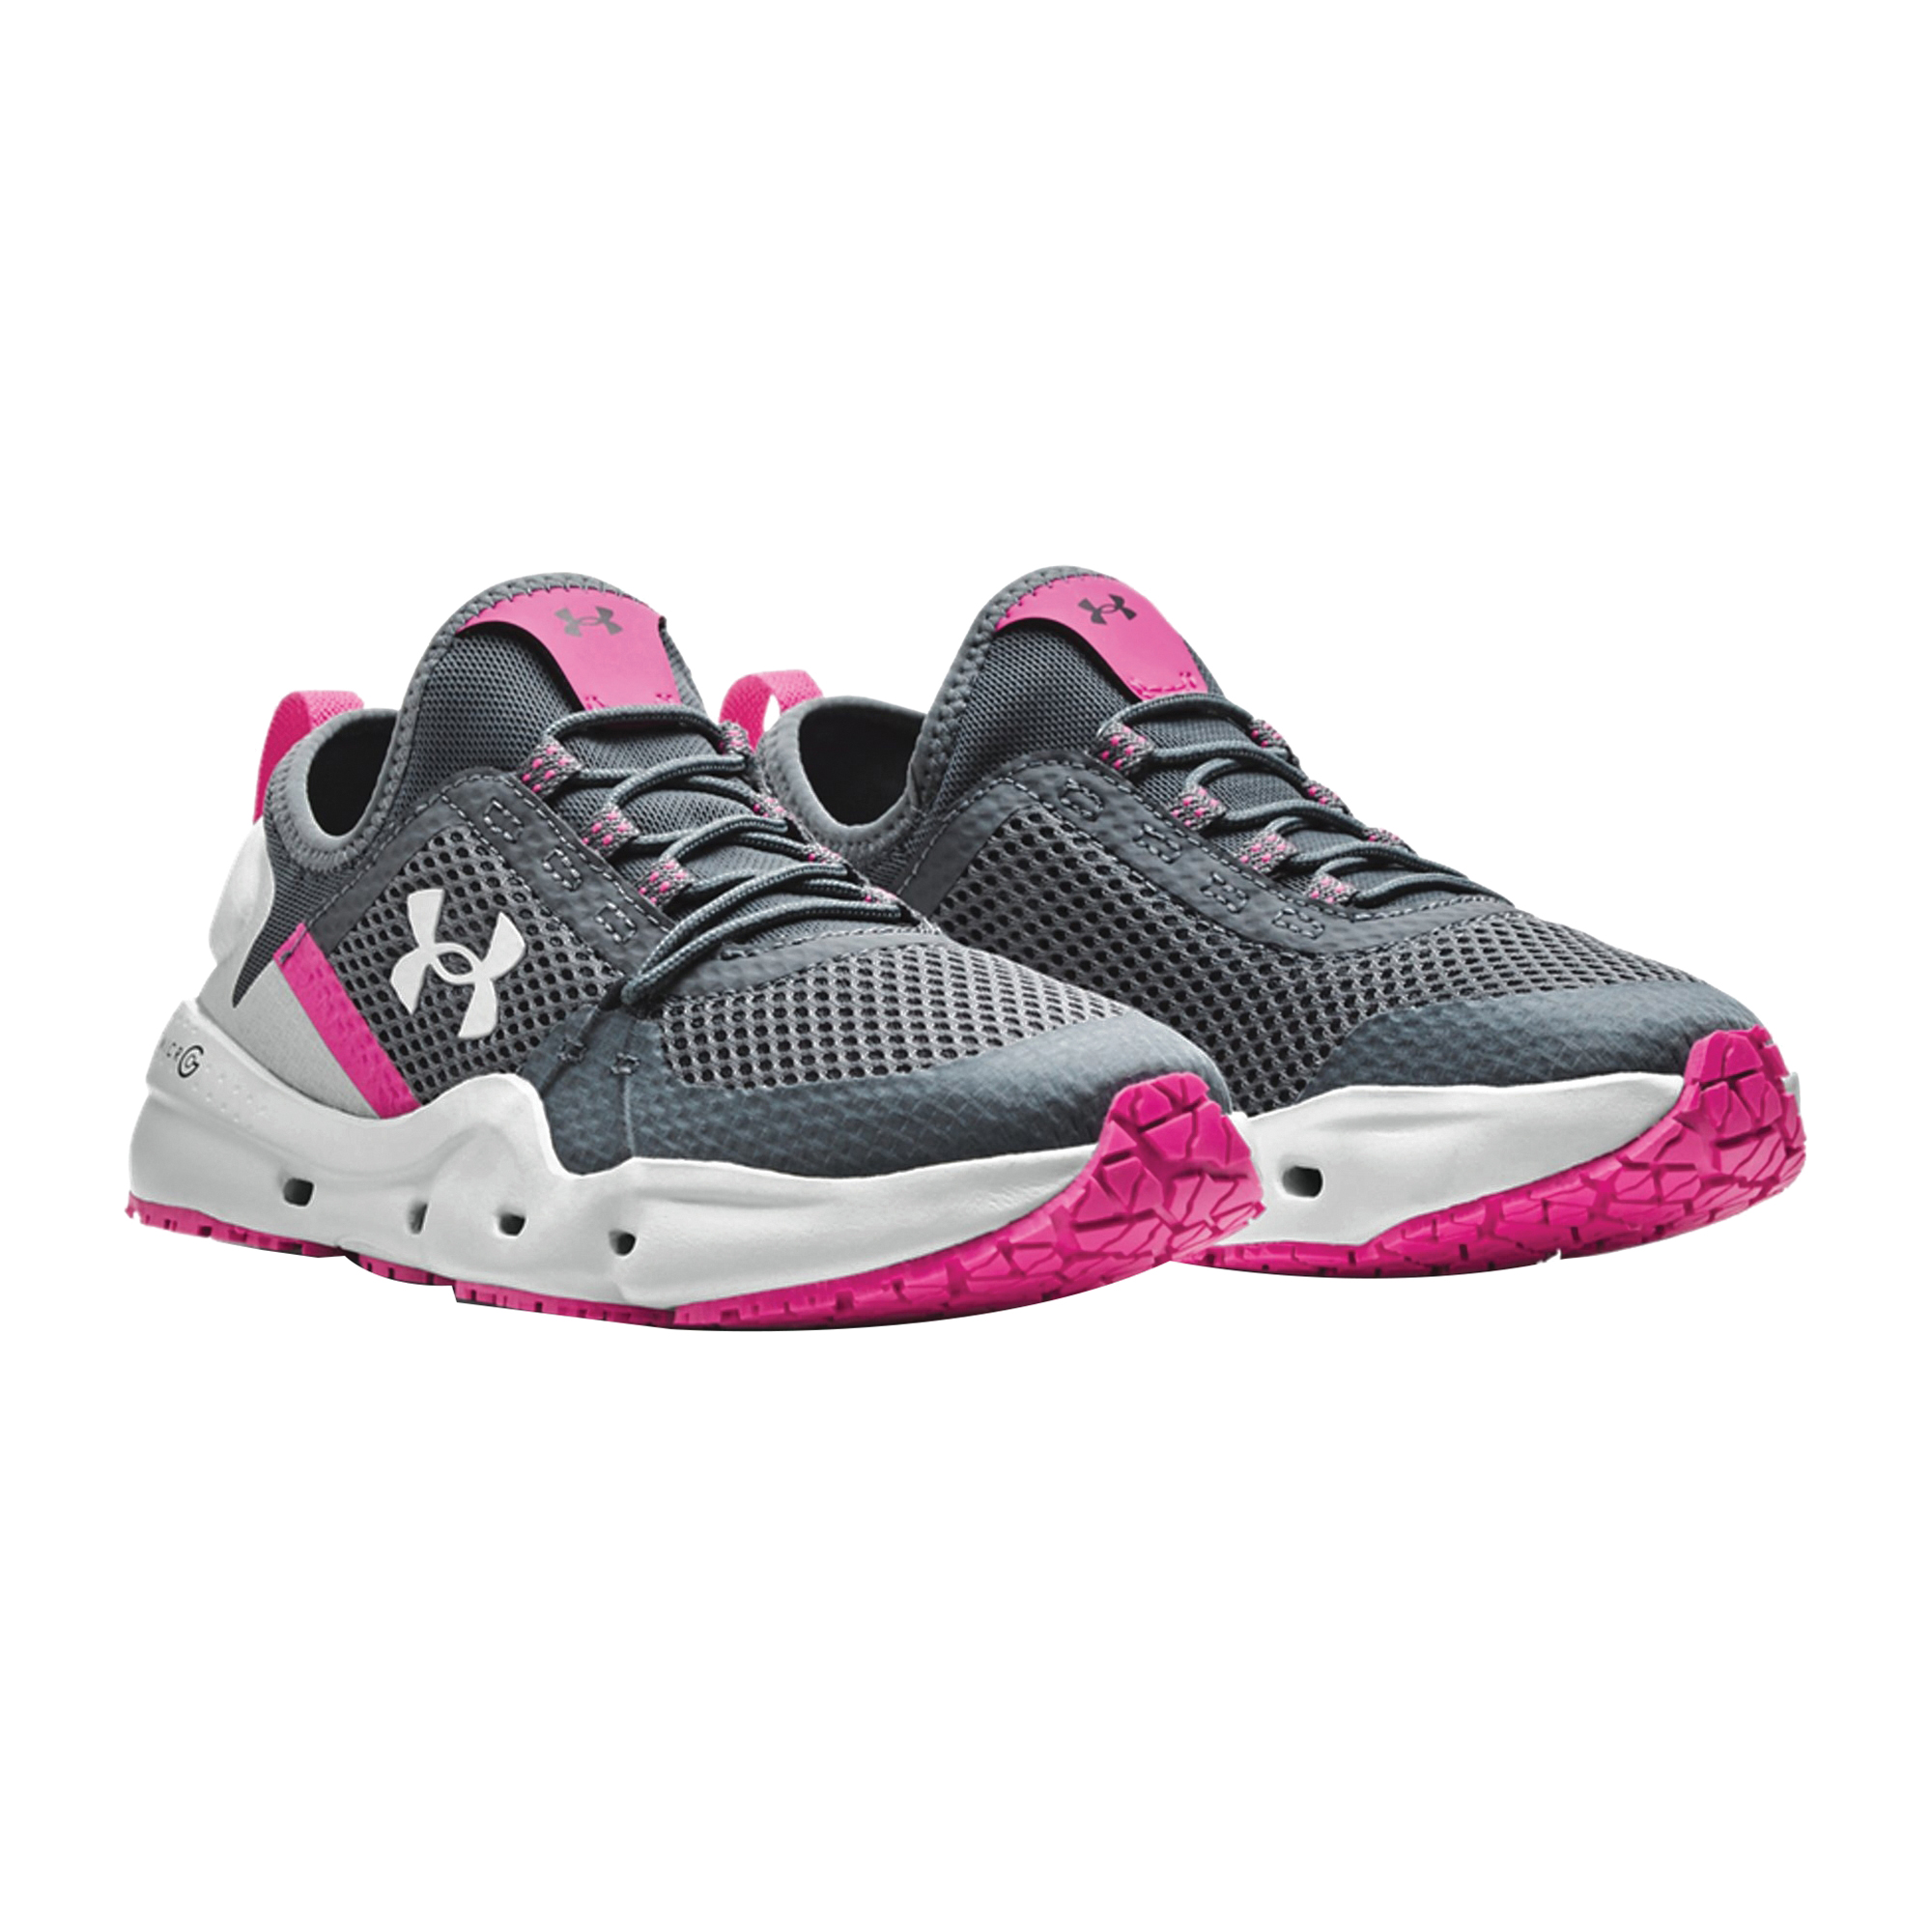 Under Armour Kilchis Series 3023740-103-8 Fishing Shoes, 8, Gravel/Gray Mist, Synthetic Leather, Lace-Up - 4